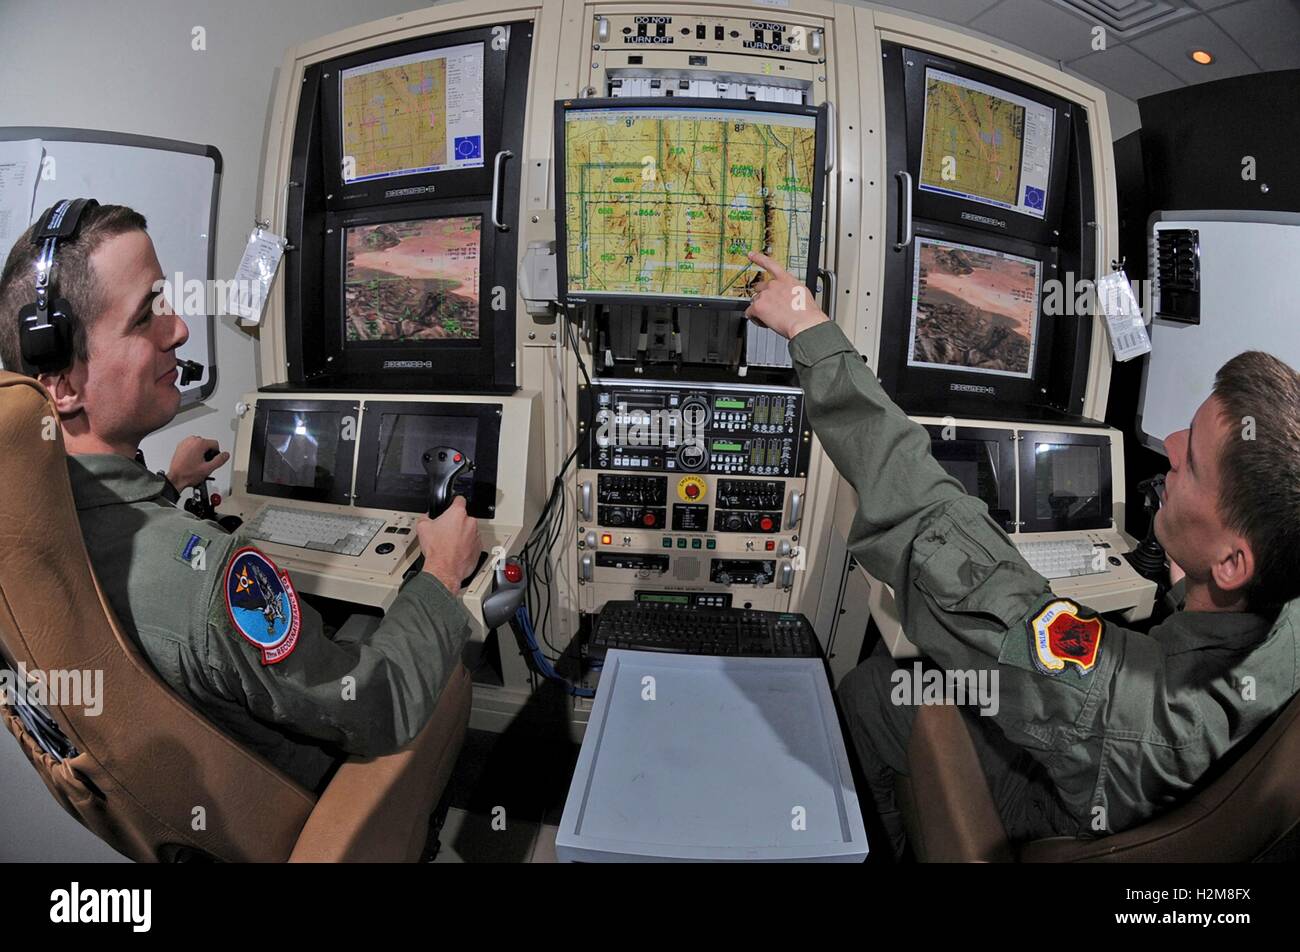 U.S. Air Force soldiers use simulators to learn how to fly and target drone aircraft during a training mission at Creech Air Force Base April 13, 2009 in Indian Springs, Nevada. Stock Photo